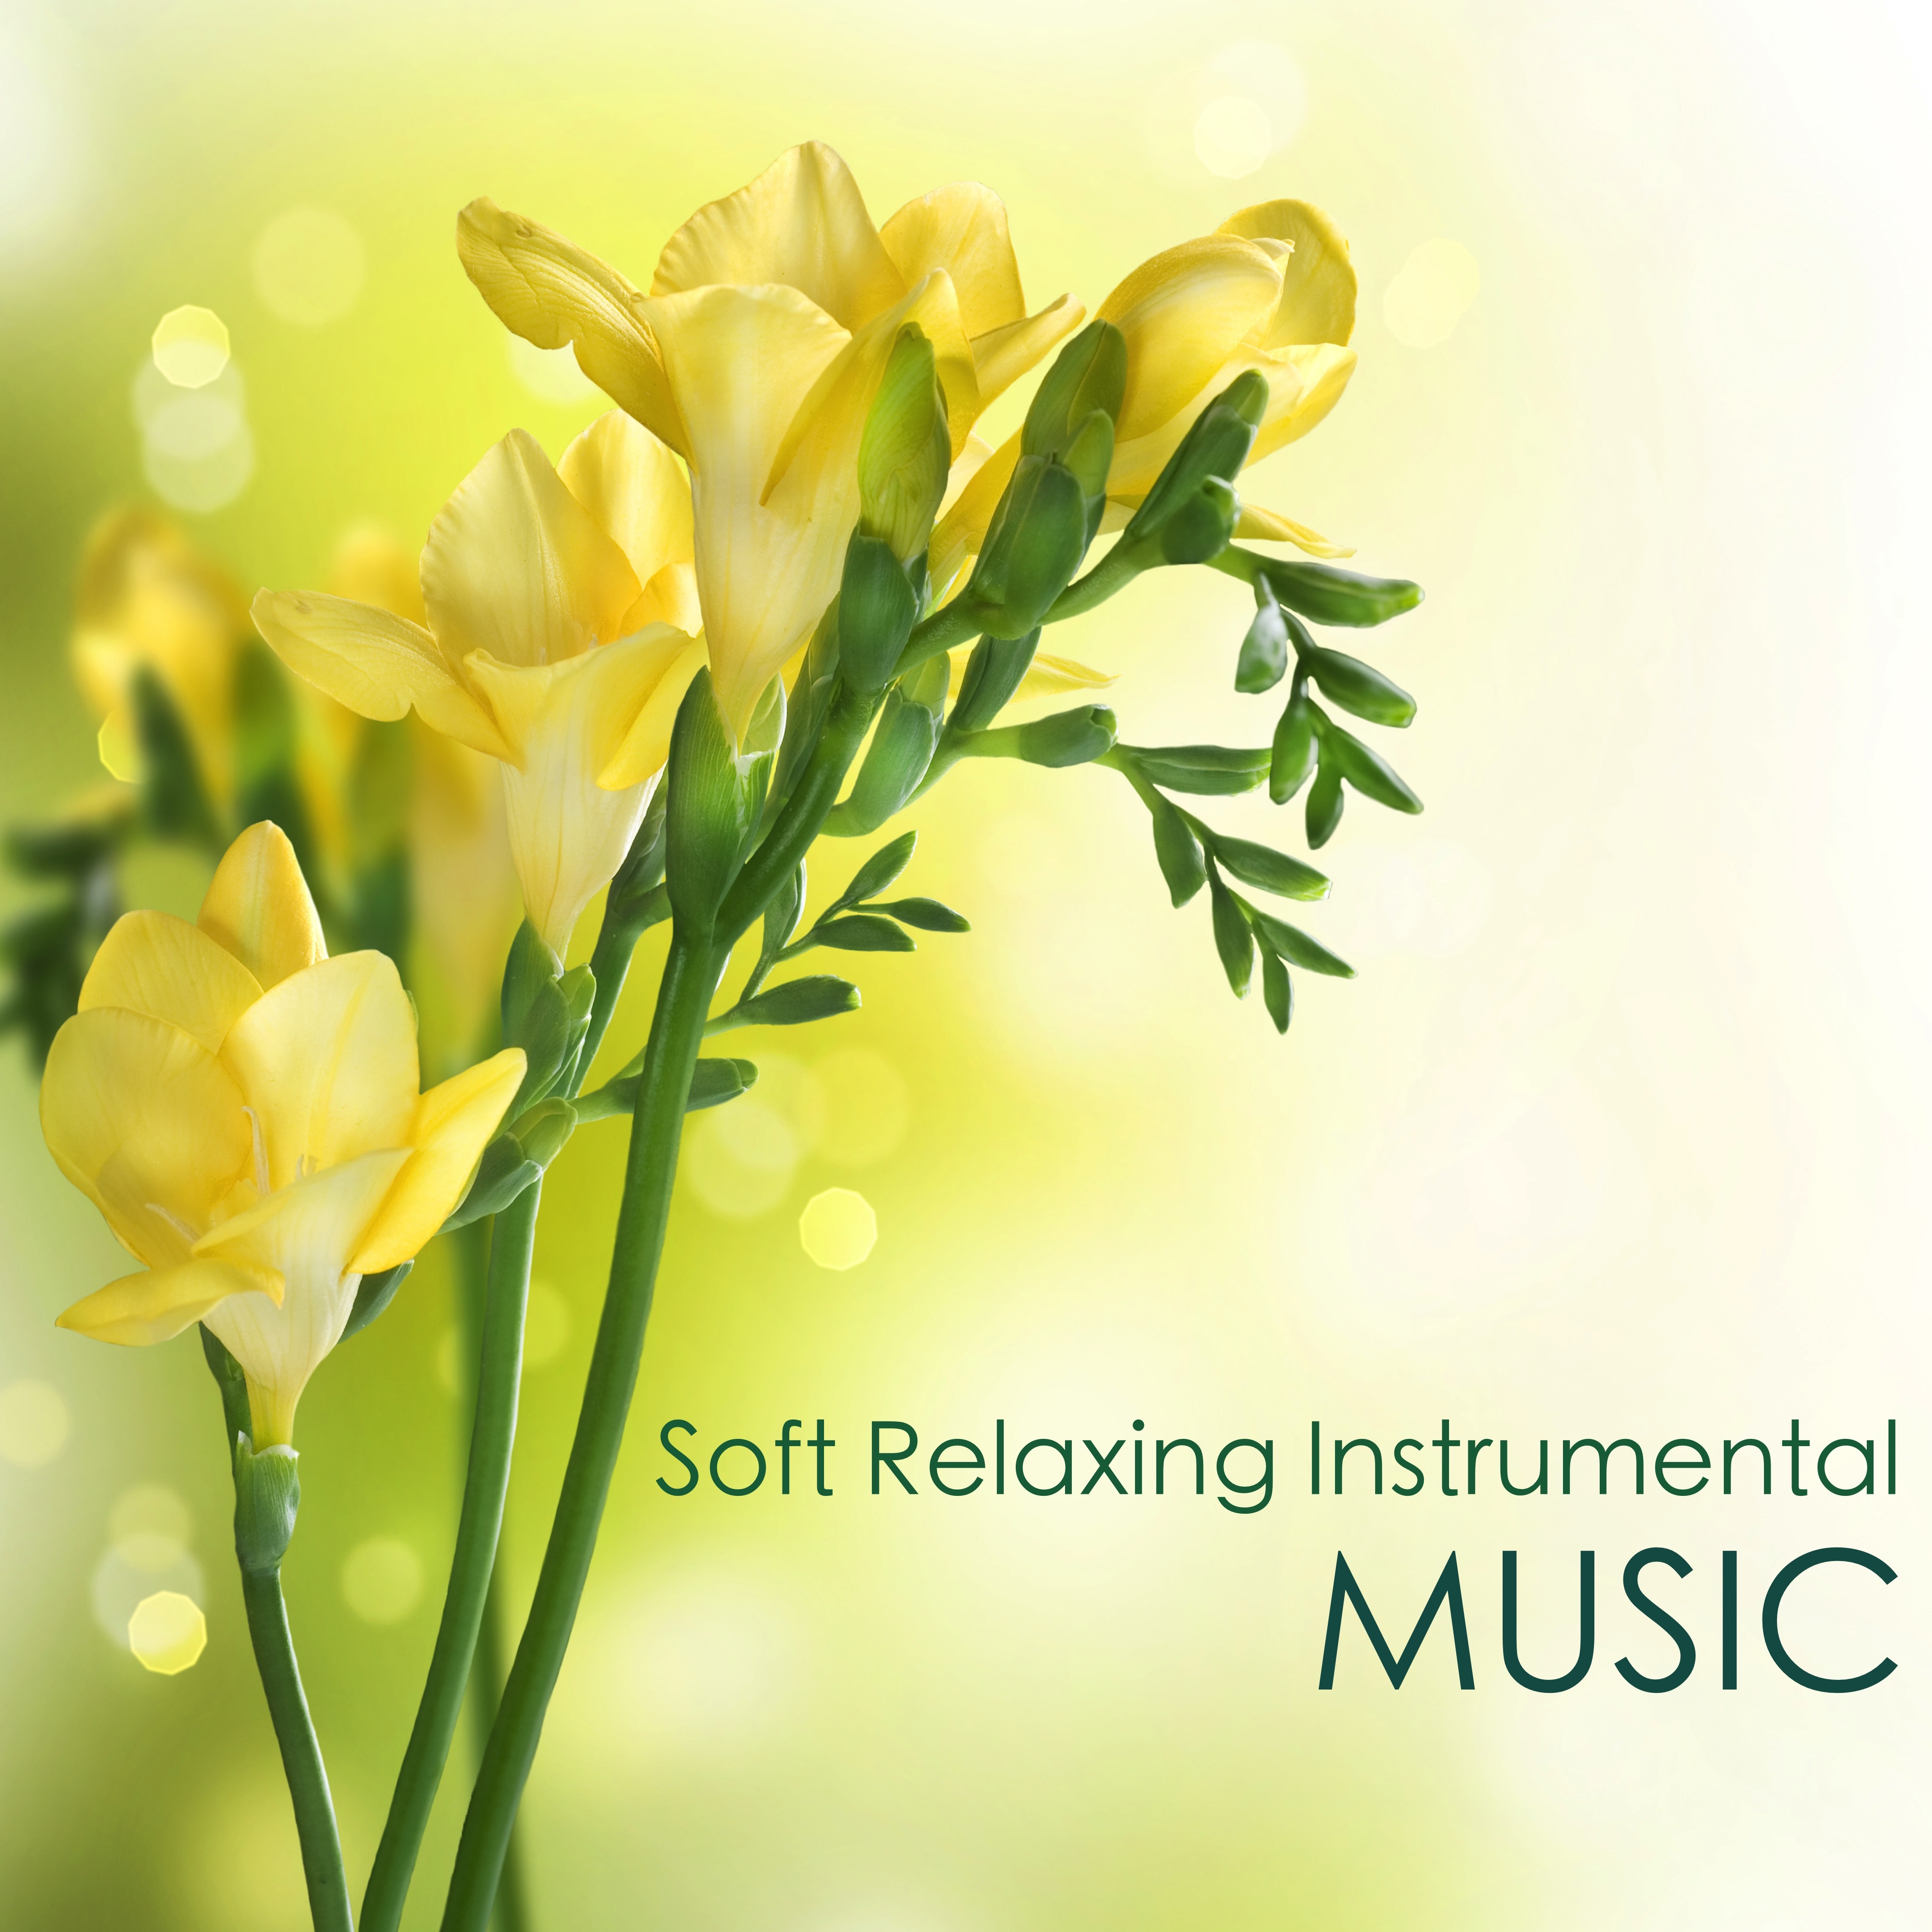 Soft Relaxing Instrumental Music: Inspirational Songs for Calming, Inner Peace of Mind and Concentration